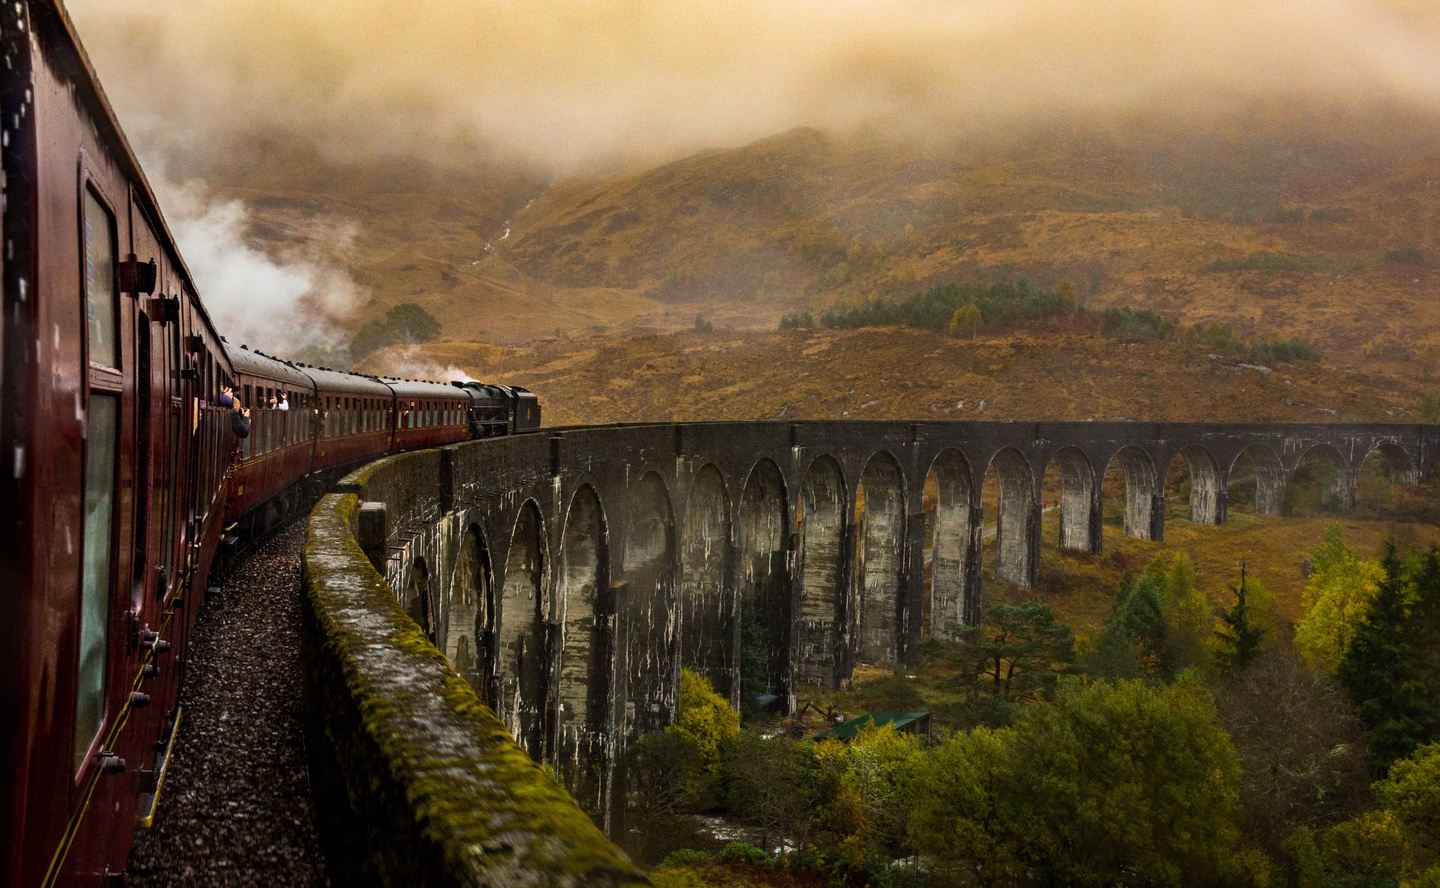 Harry Potter Special in the Scottish Highlands